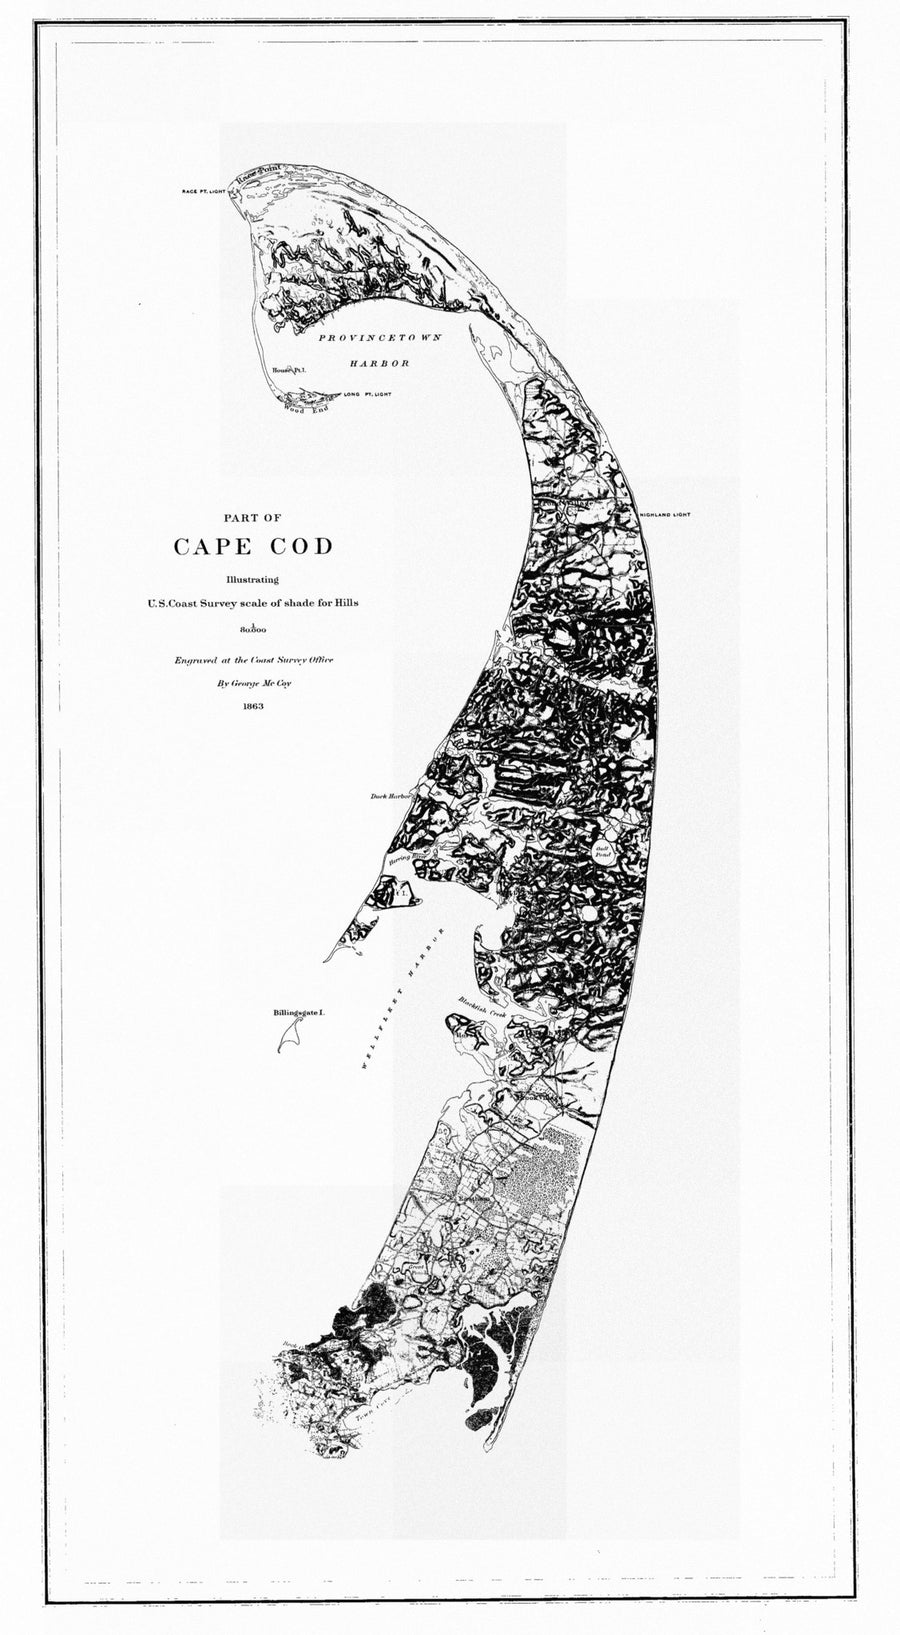 Outer Cape Cod Map - 1863